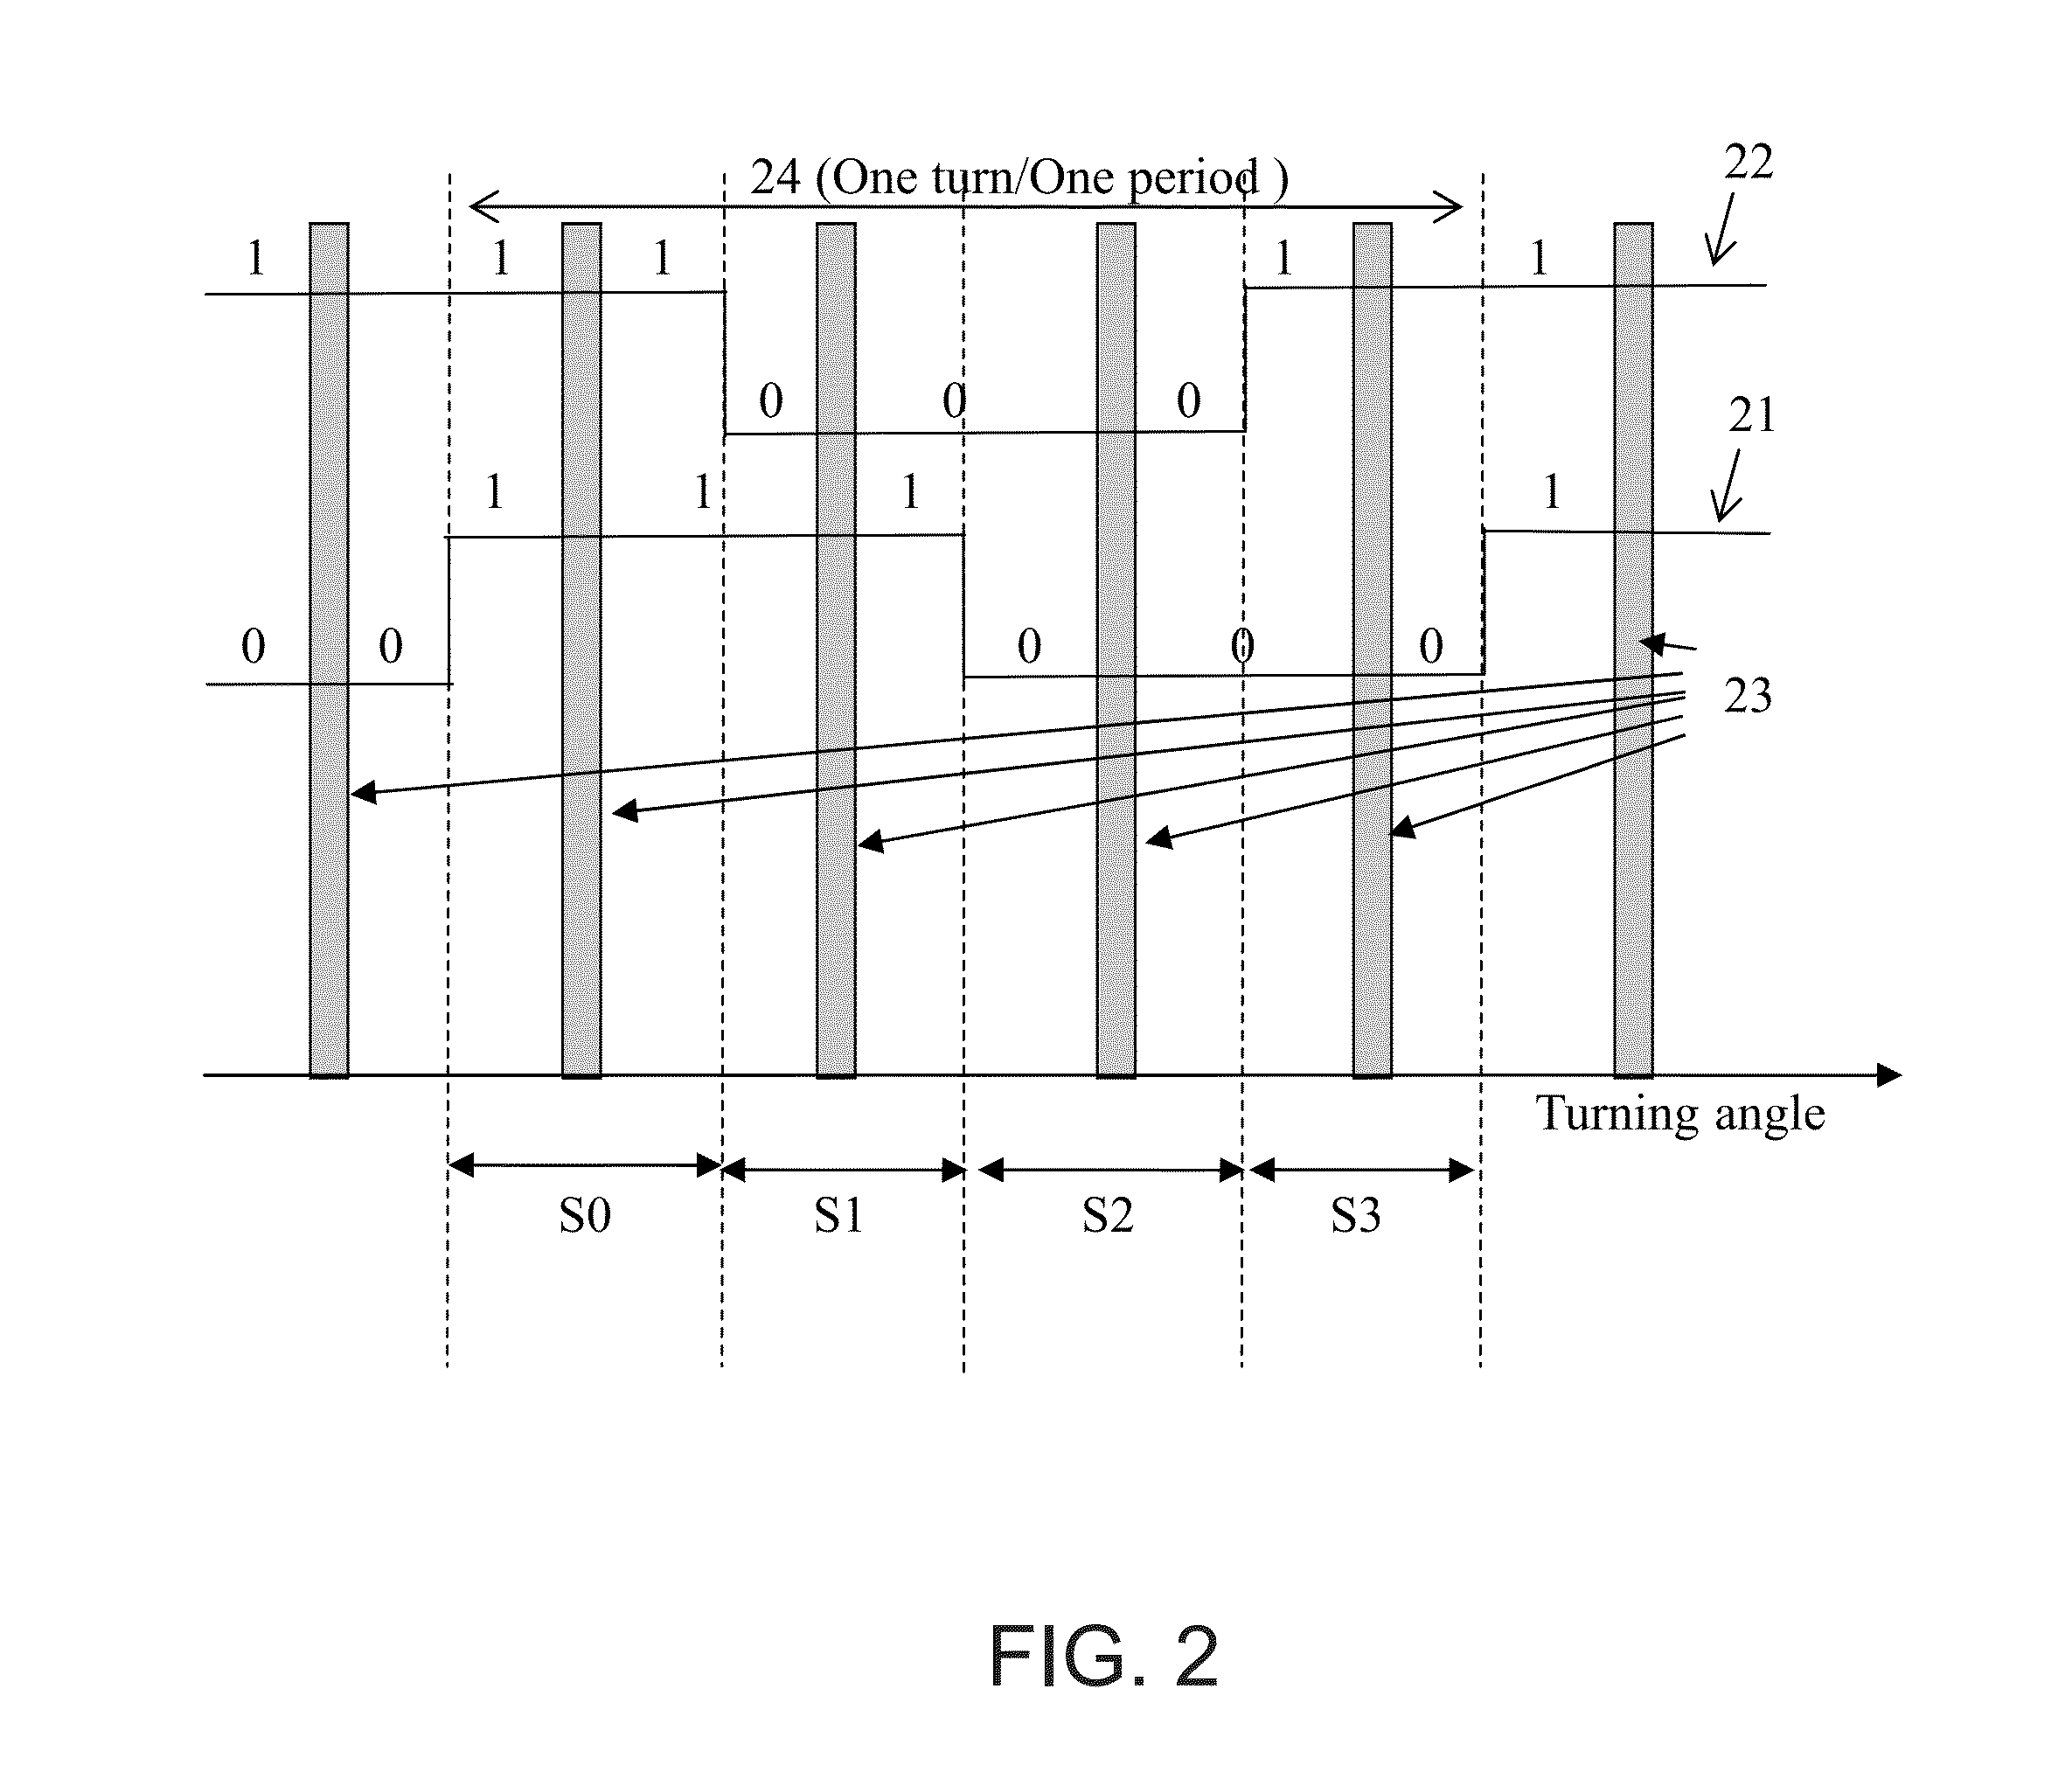 Apparatus and method for measuring displacements of displaceable members